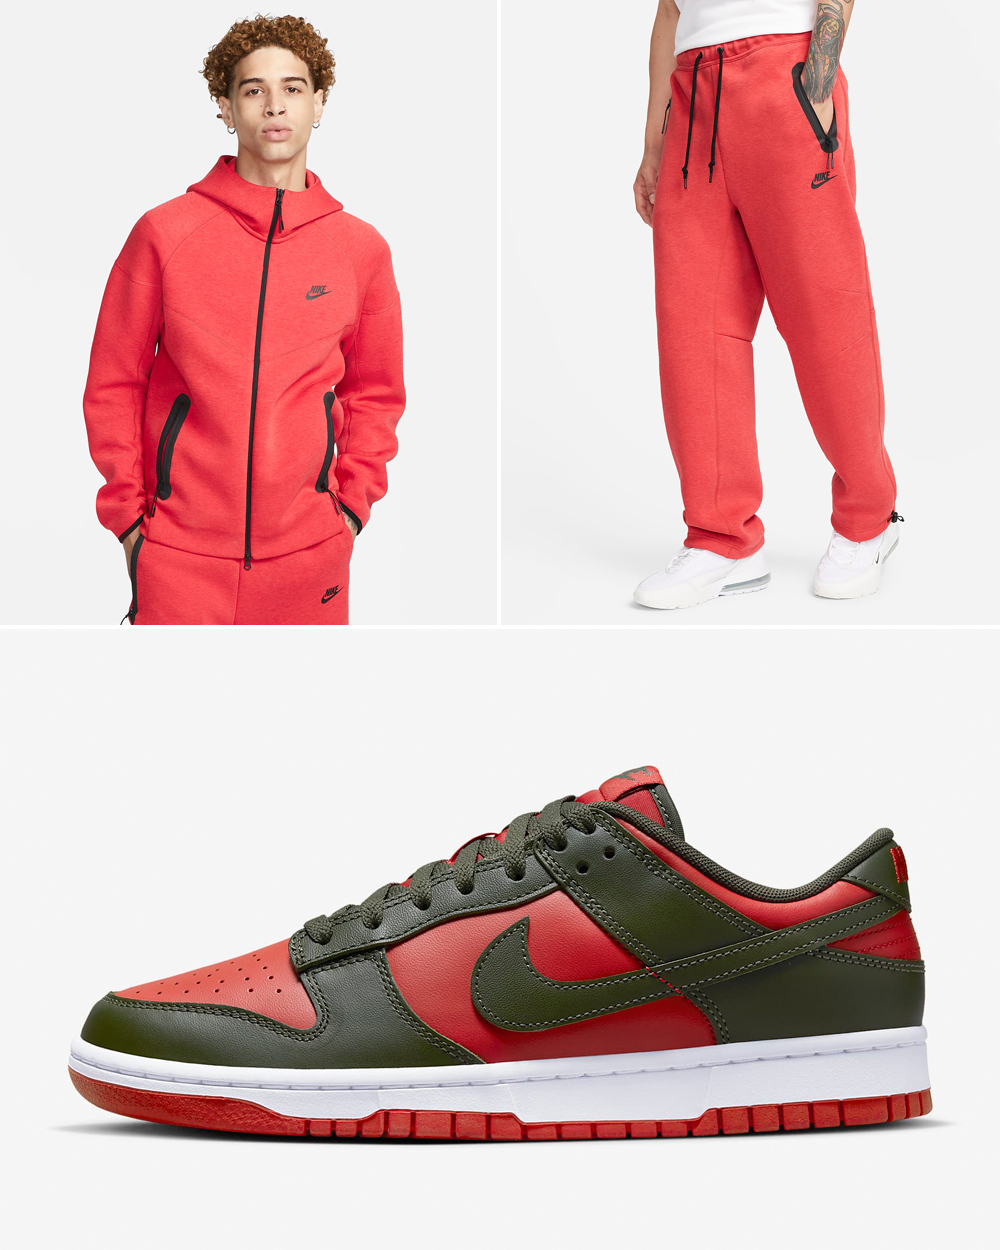 Nike Dunk Low Mystic Red Clothing Match